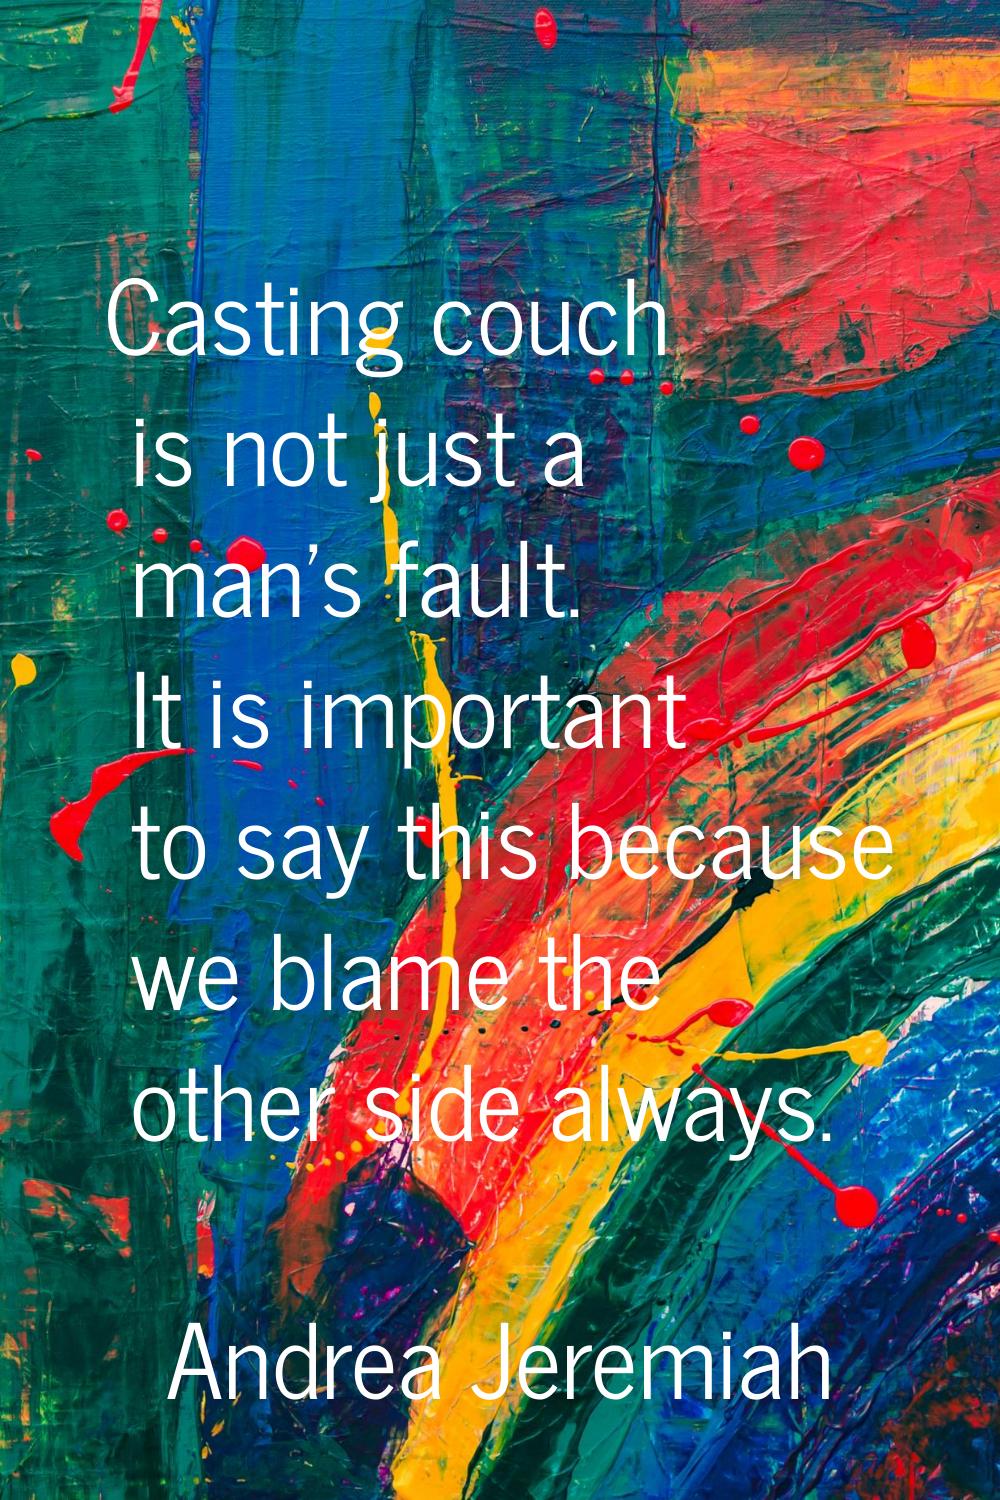 Casting couch is not just a man's fault. It is important to say this because we blame the other sid